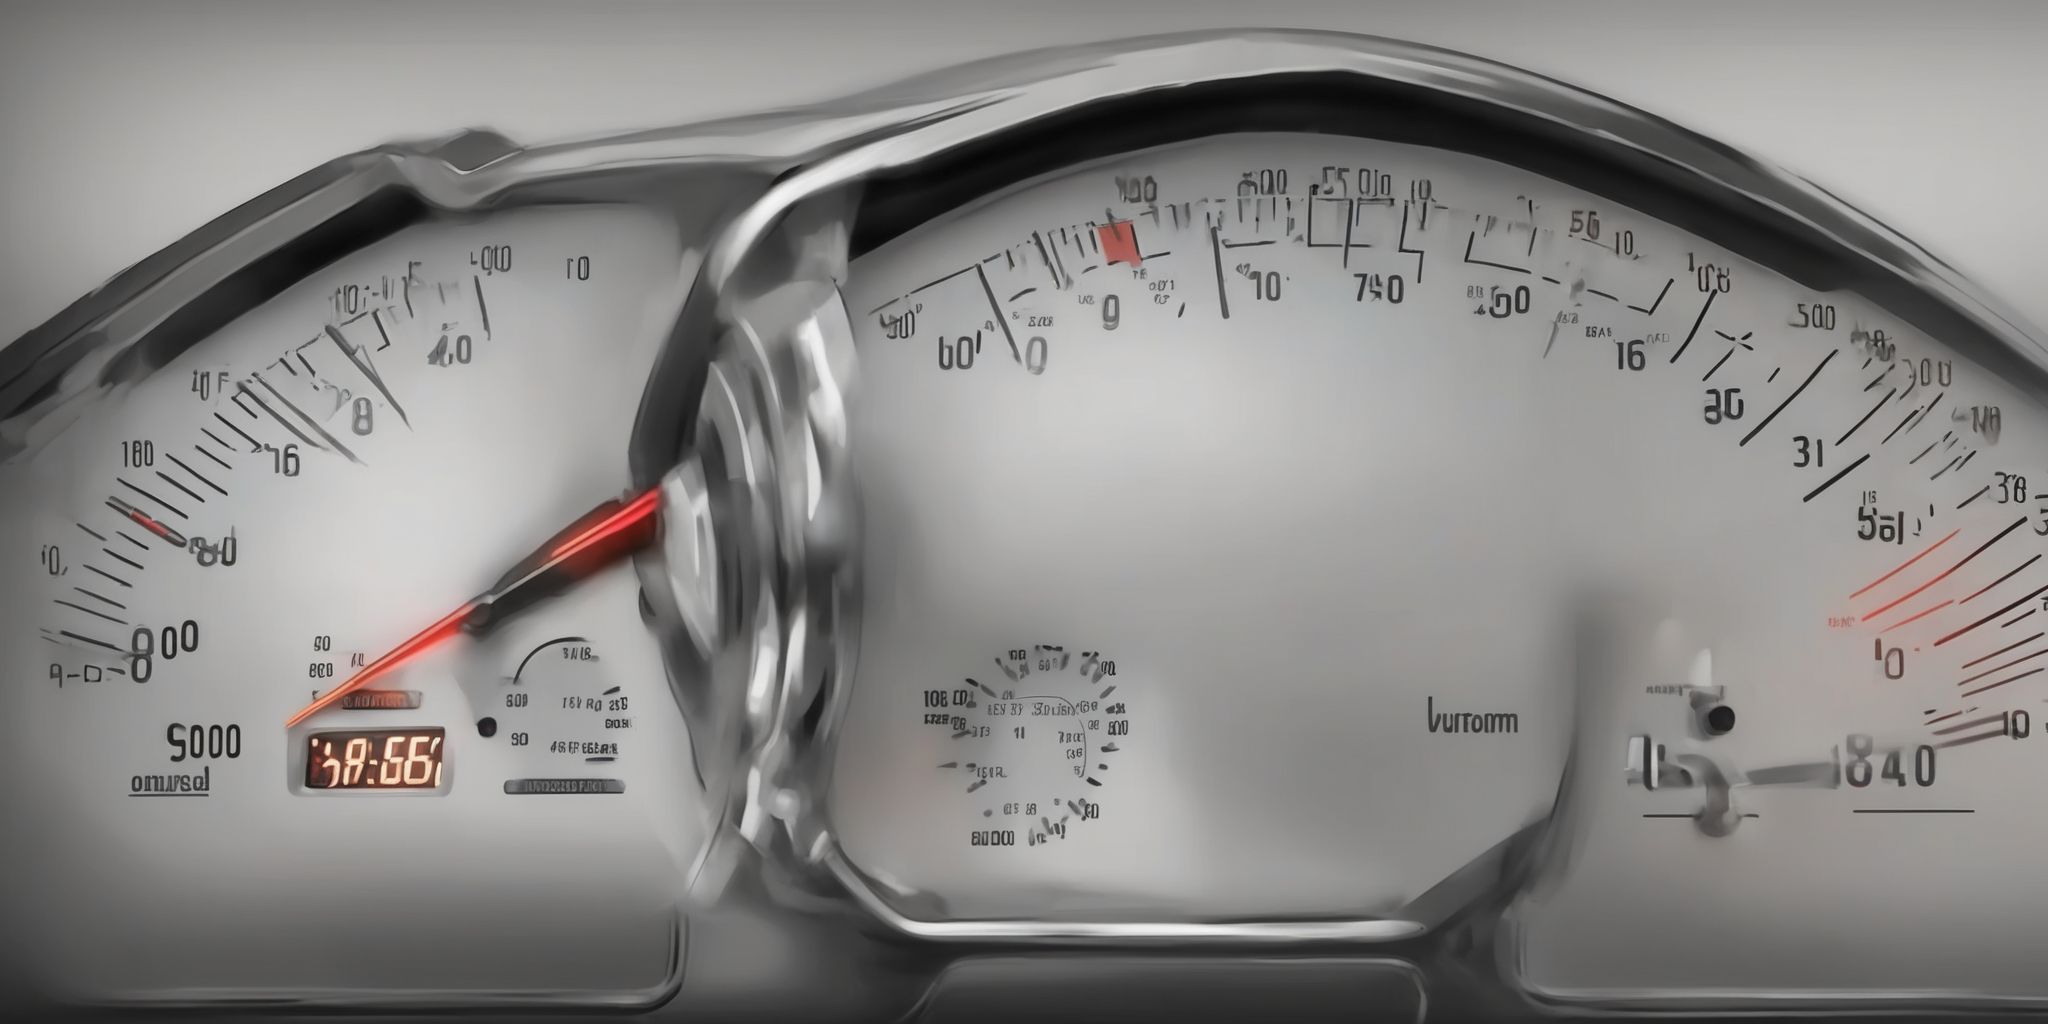 Speedometer  in realistic, photographic style